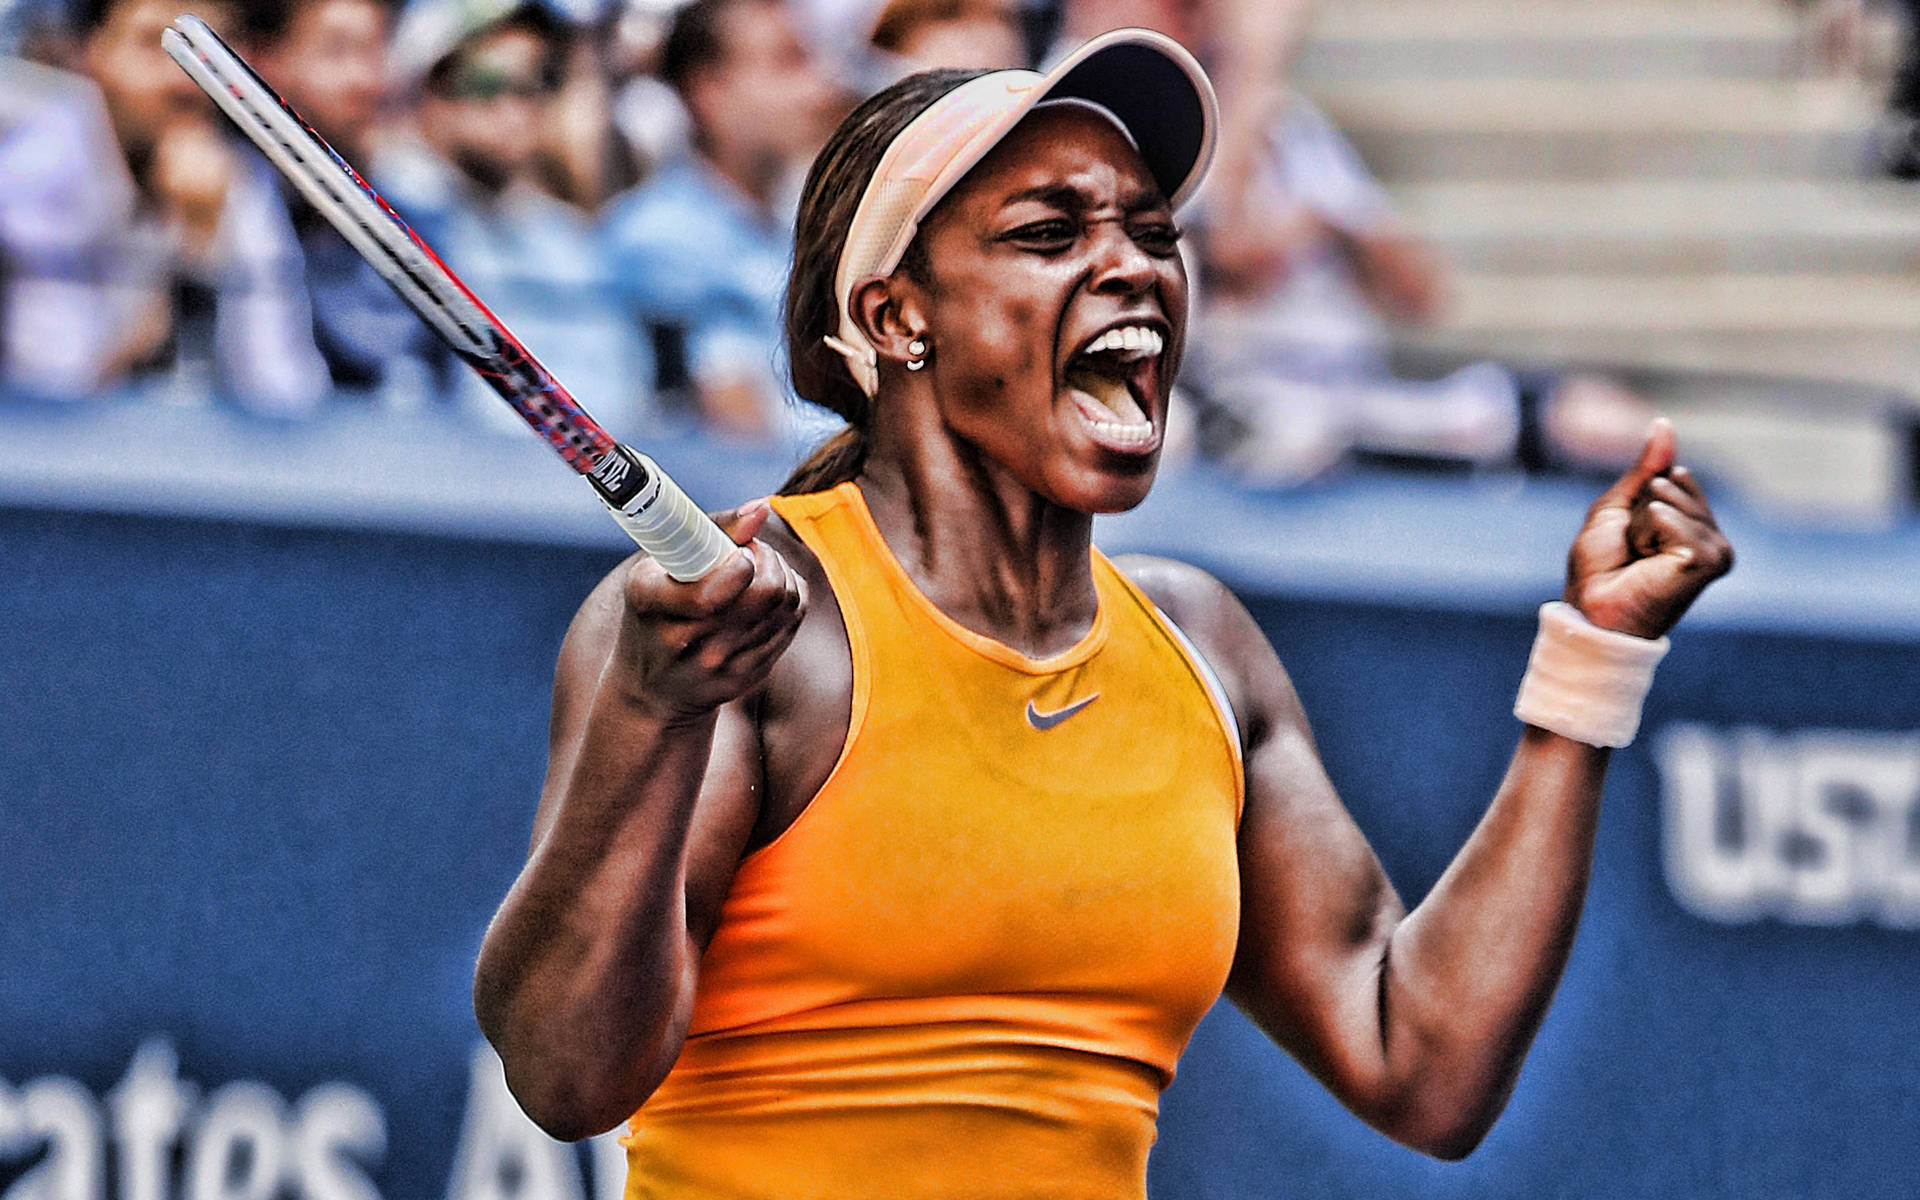 Pro Tennis Player Sloane Stephens Showing Intensity On Court Wallpaper